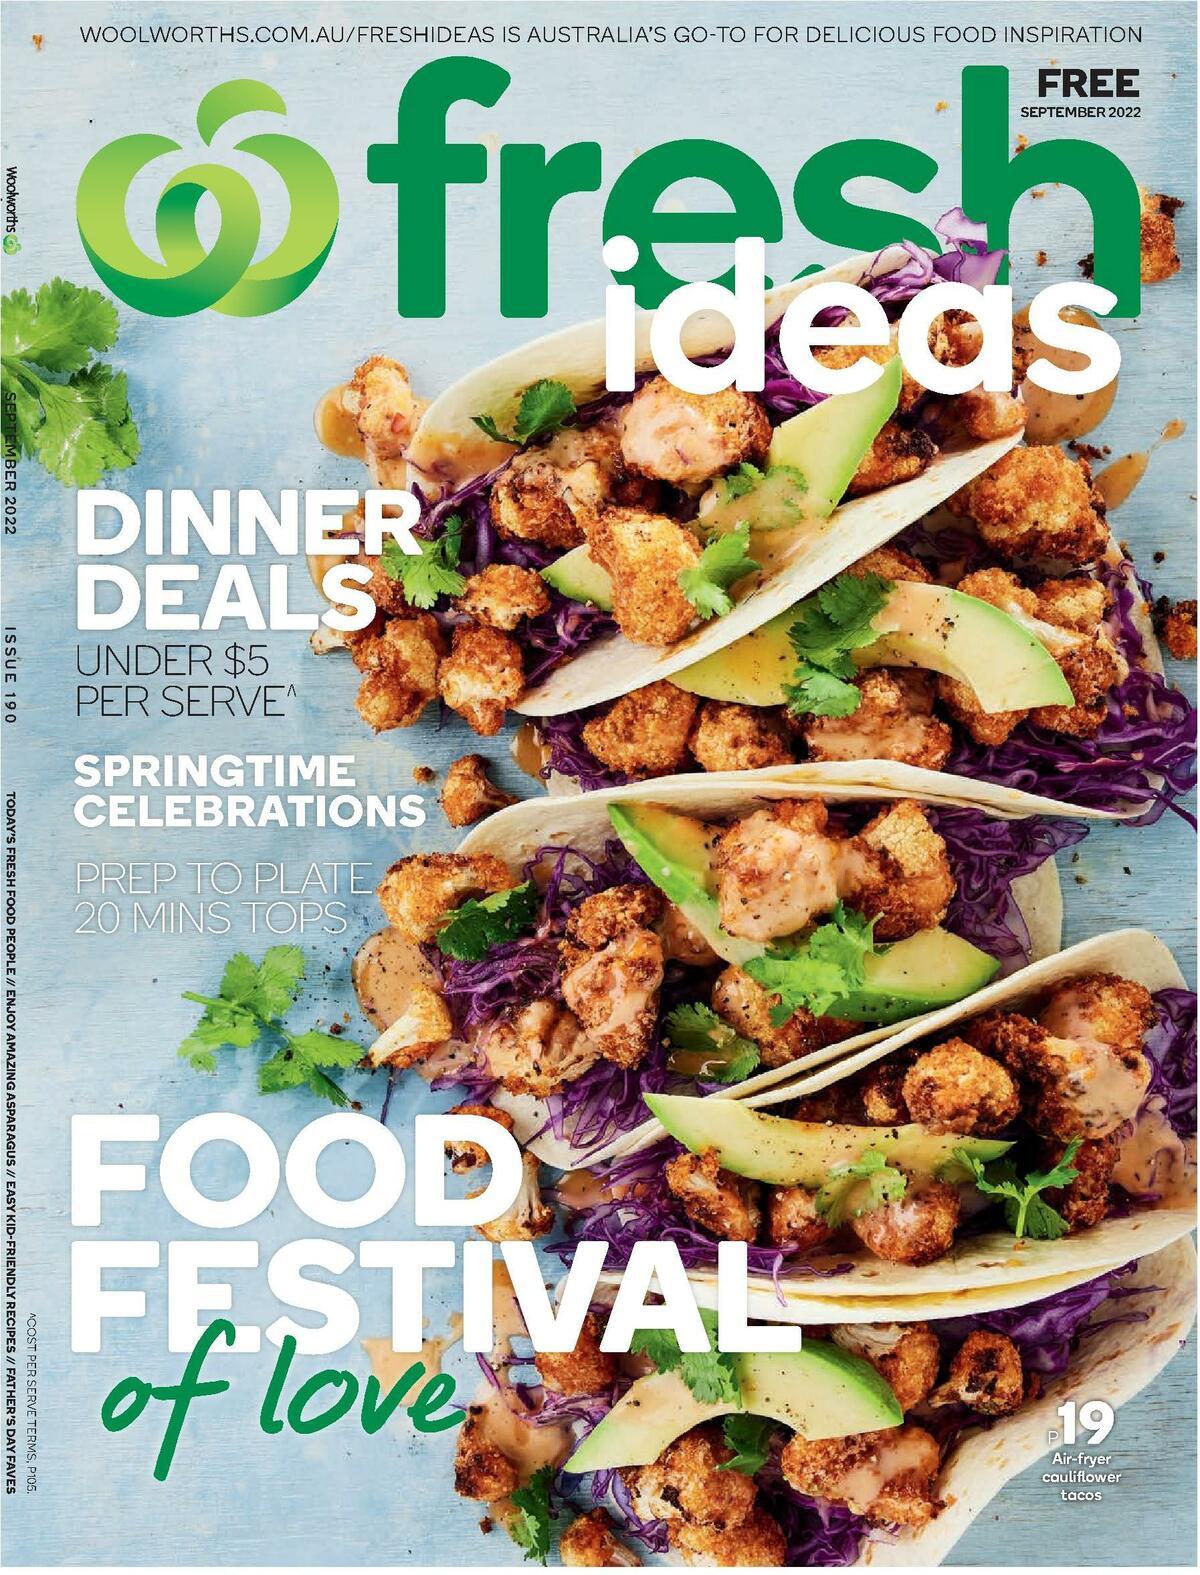 Woolworths Fresh Ideas Magazine September Catalogues from 1 September